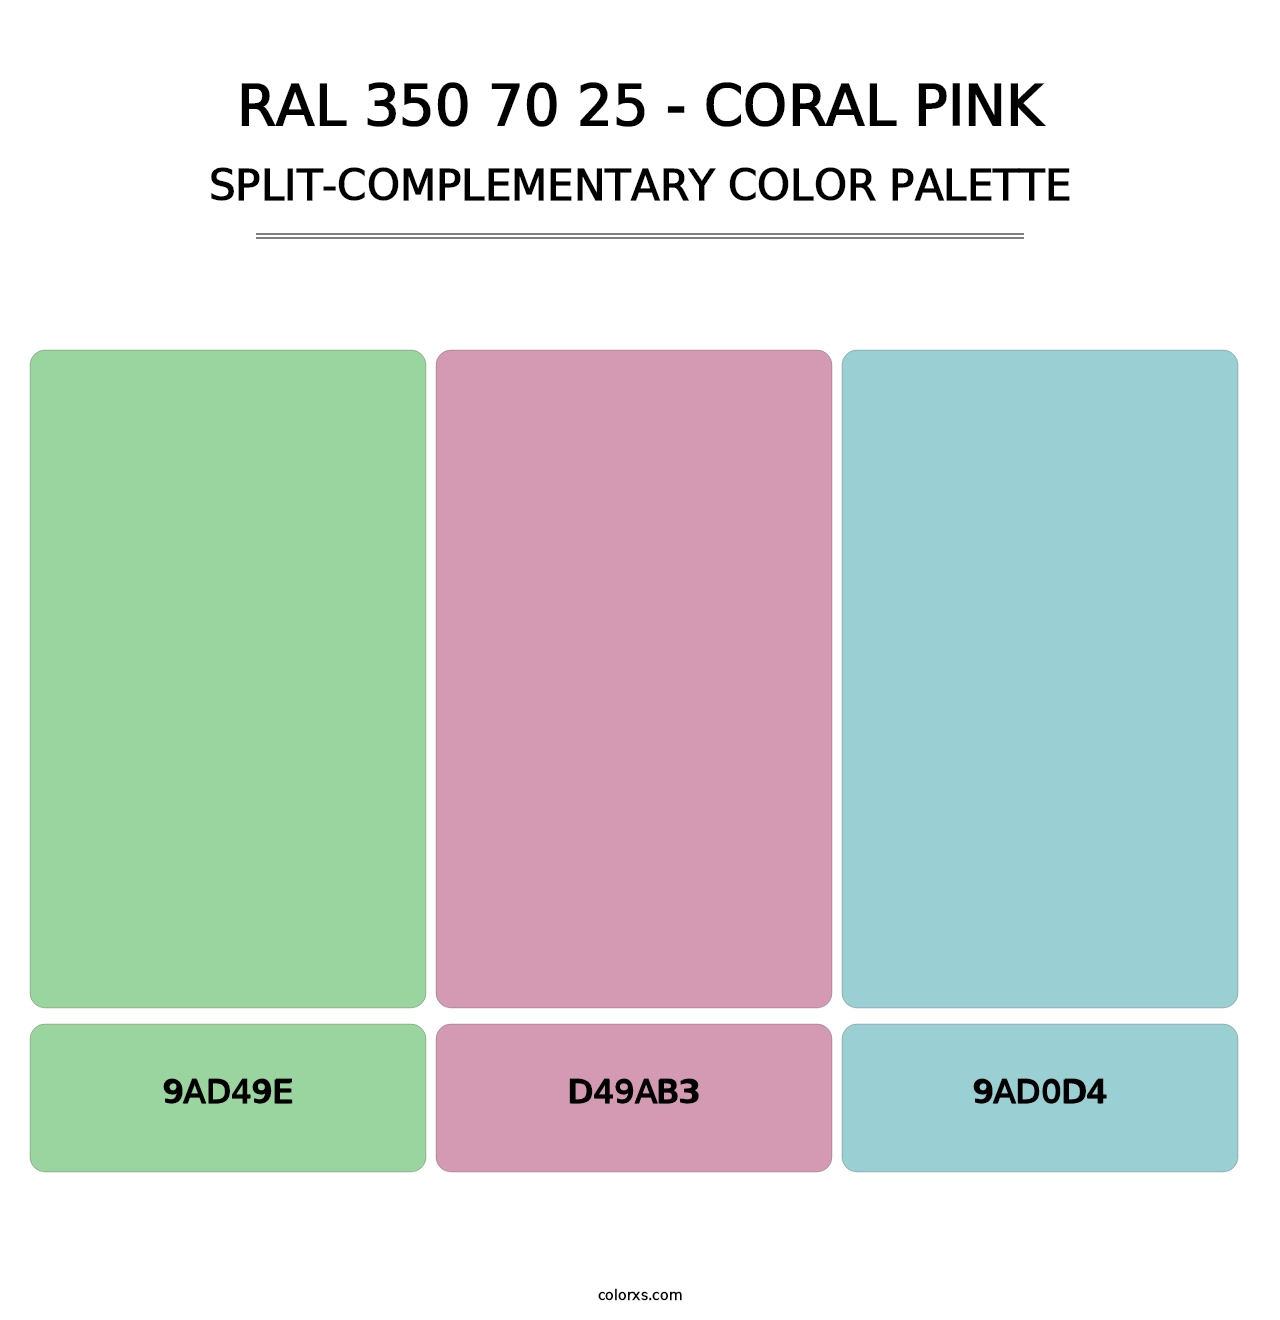 RAL 350 70 25 - Coral Pink - Split-Complementary Color Palette